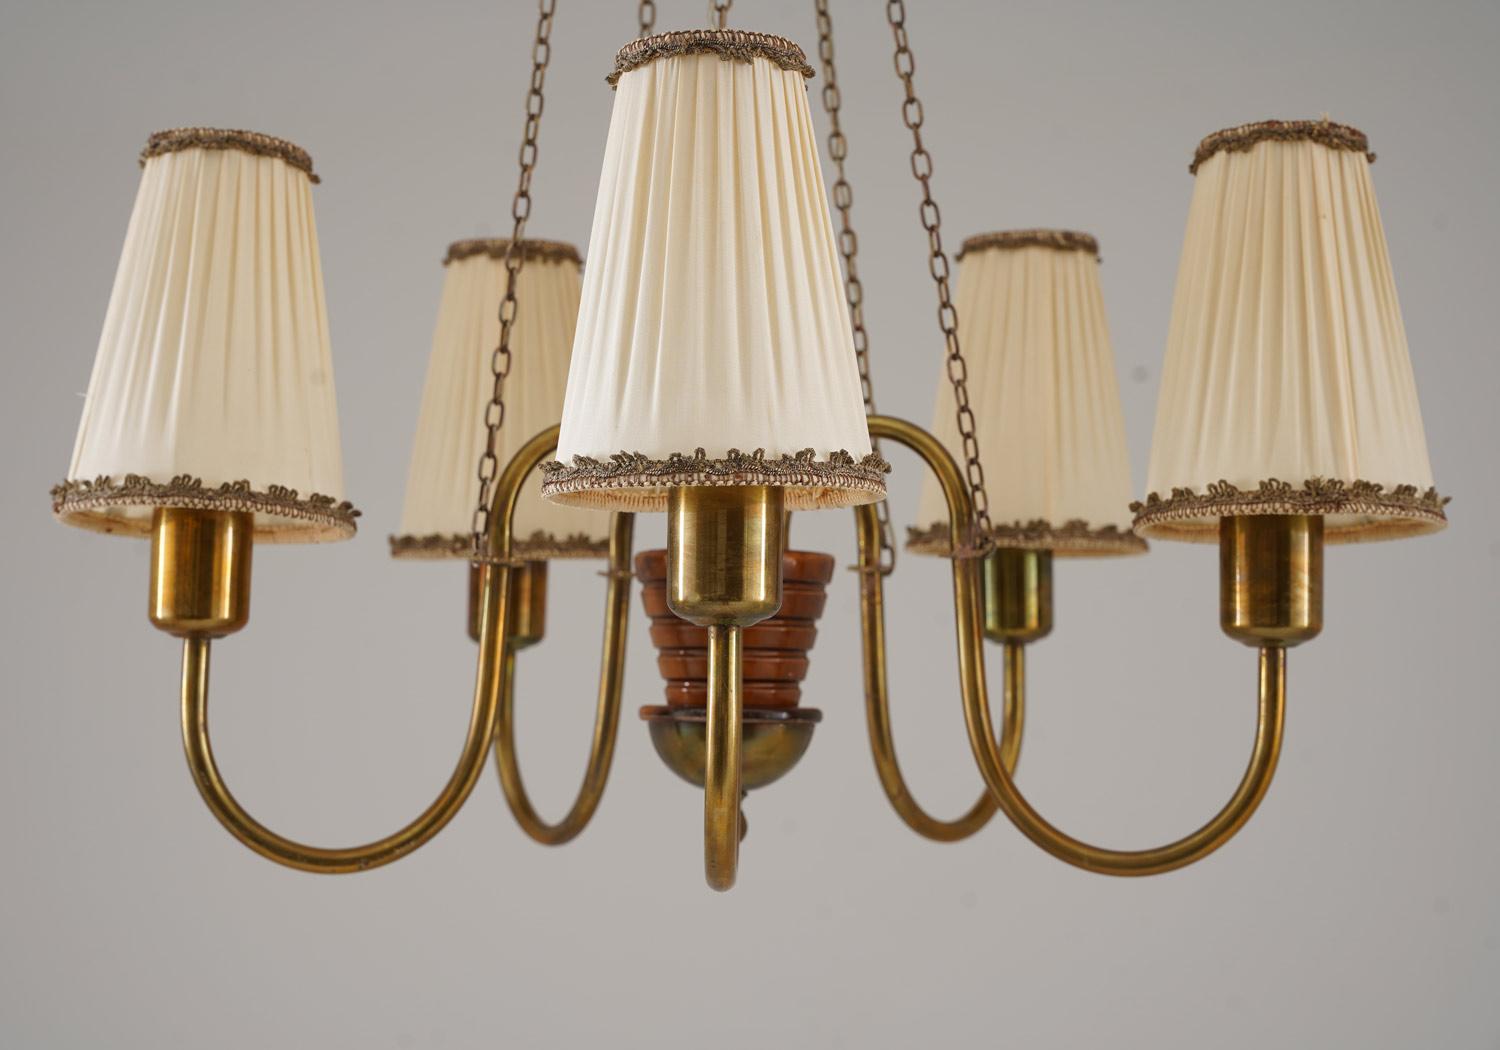 Swedish Modern Chandelier in Brass and Wood, 1940s In Good Condition For Sale In Karlstad, SE